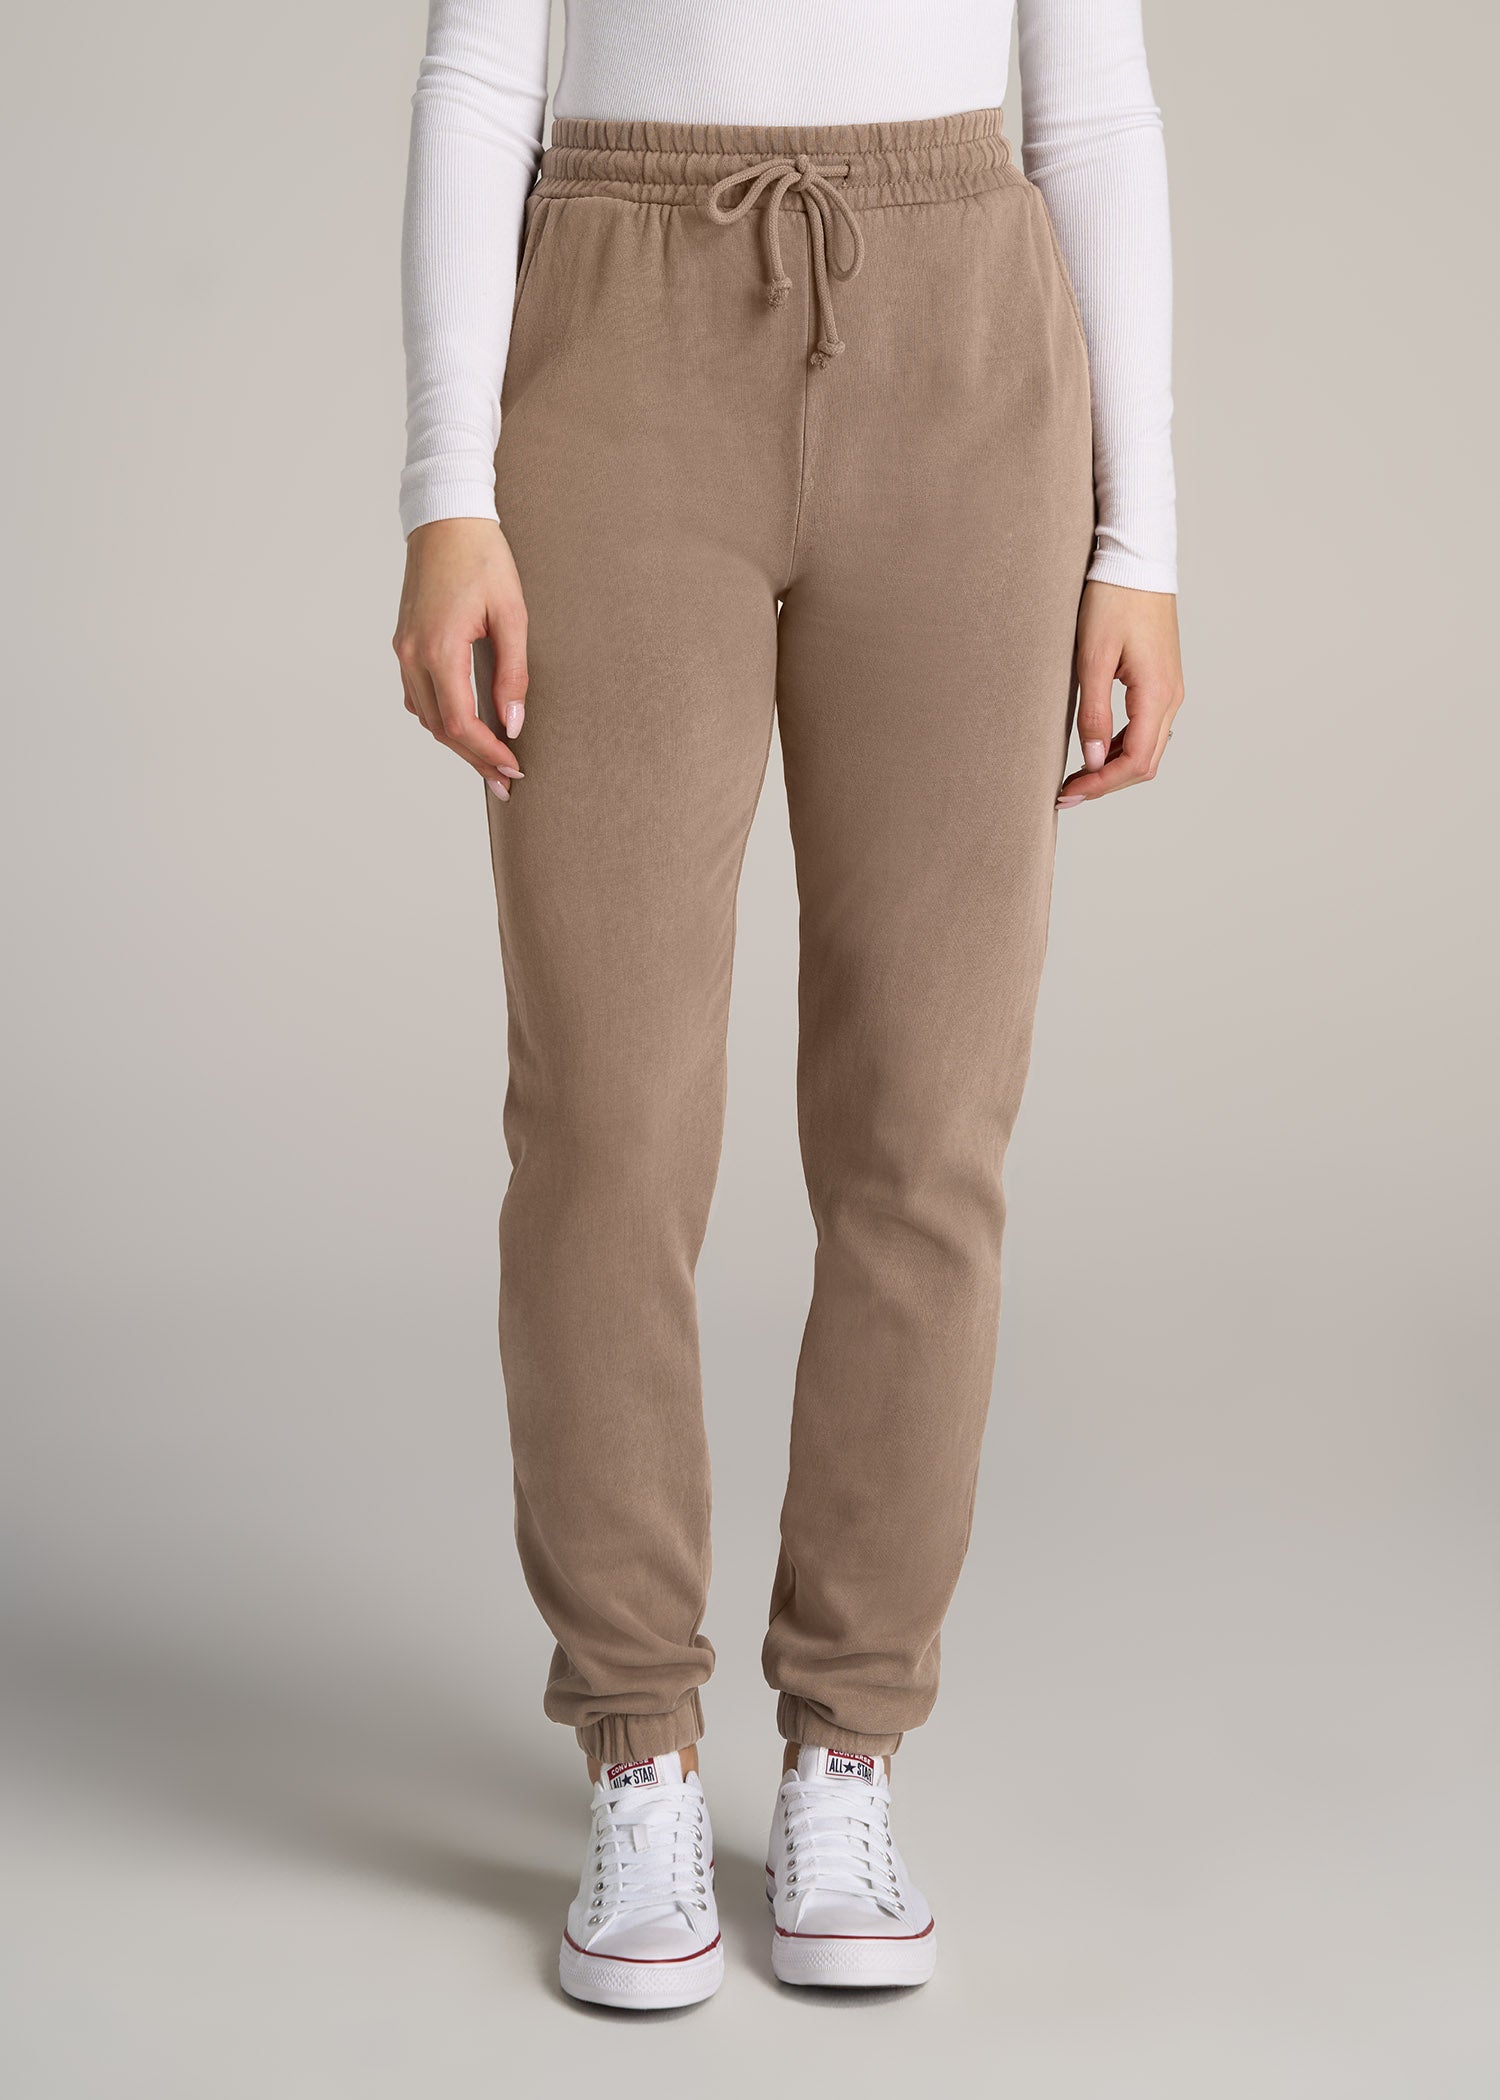 Soft Jersey Classic-Fit Mid-Rise Cropped Jogger, Women's Capris